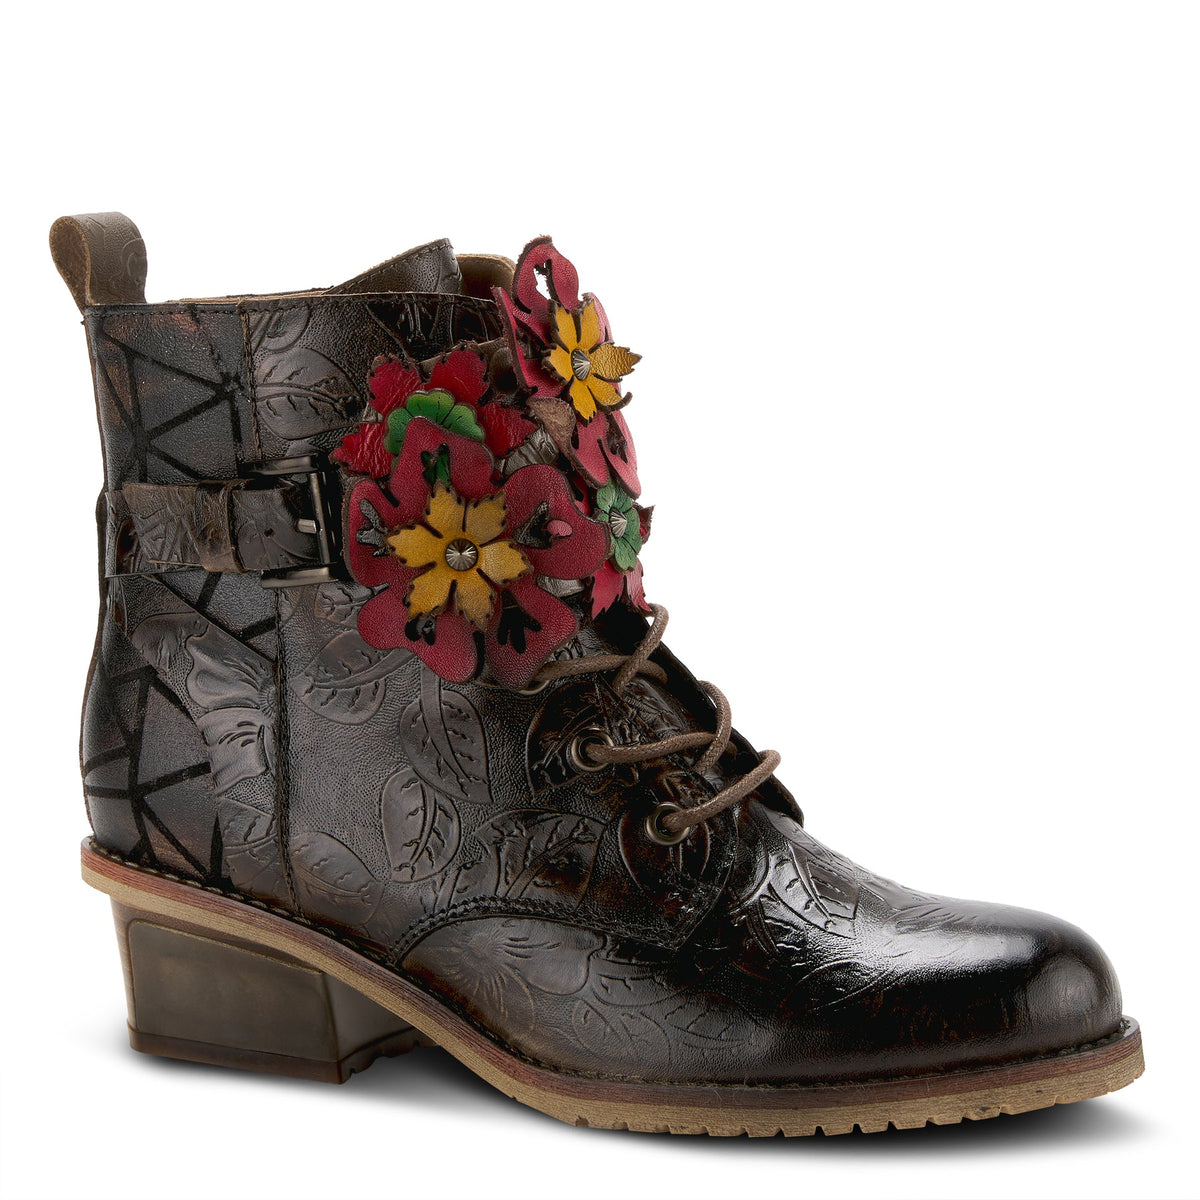 Dark brown L'Artiste Brand Groovie Booties with floral leather details and side zipper